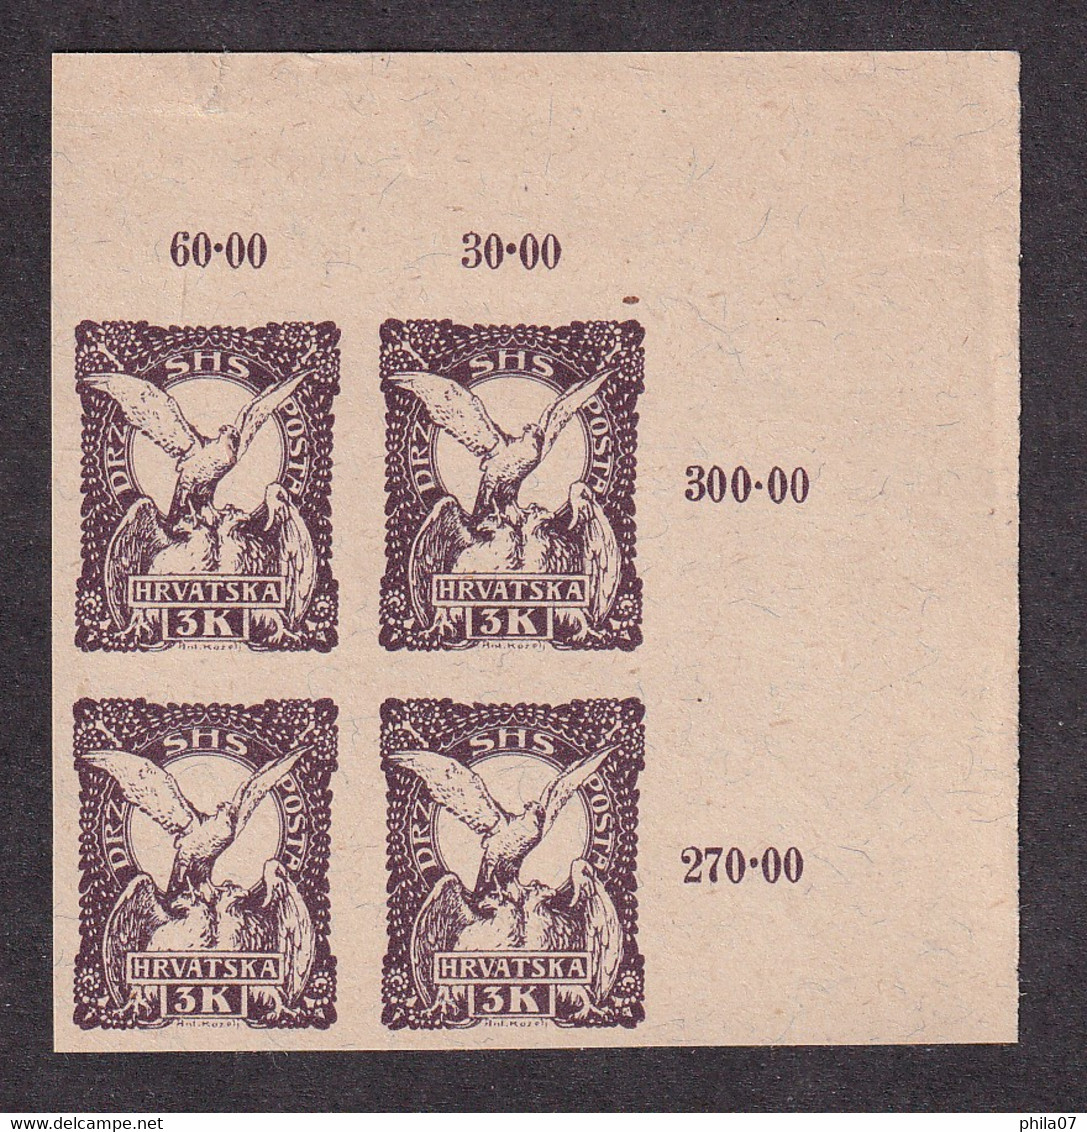 STATE OF SLOVENES, CROATS AND SERBS PS.No. 46 - Short Opinion Pervan - Imperforate Trial Print Of Stamp Of ... / 3 Scans - Neufs